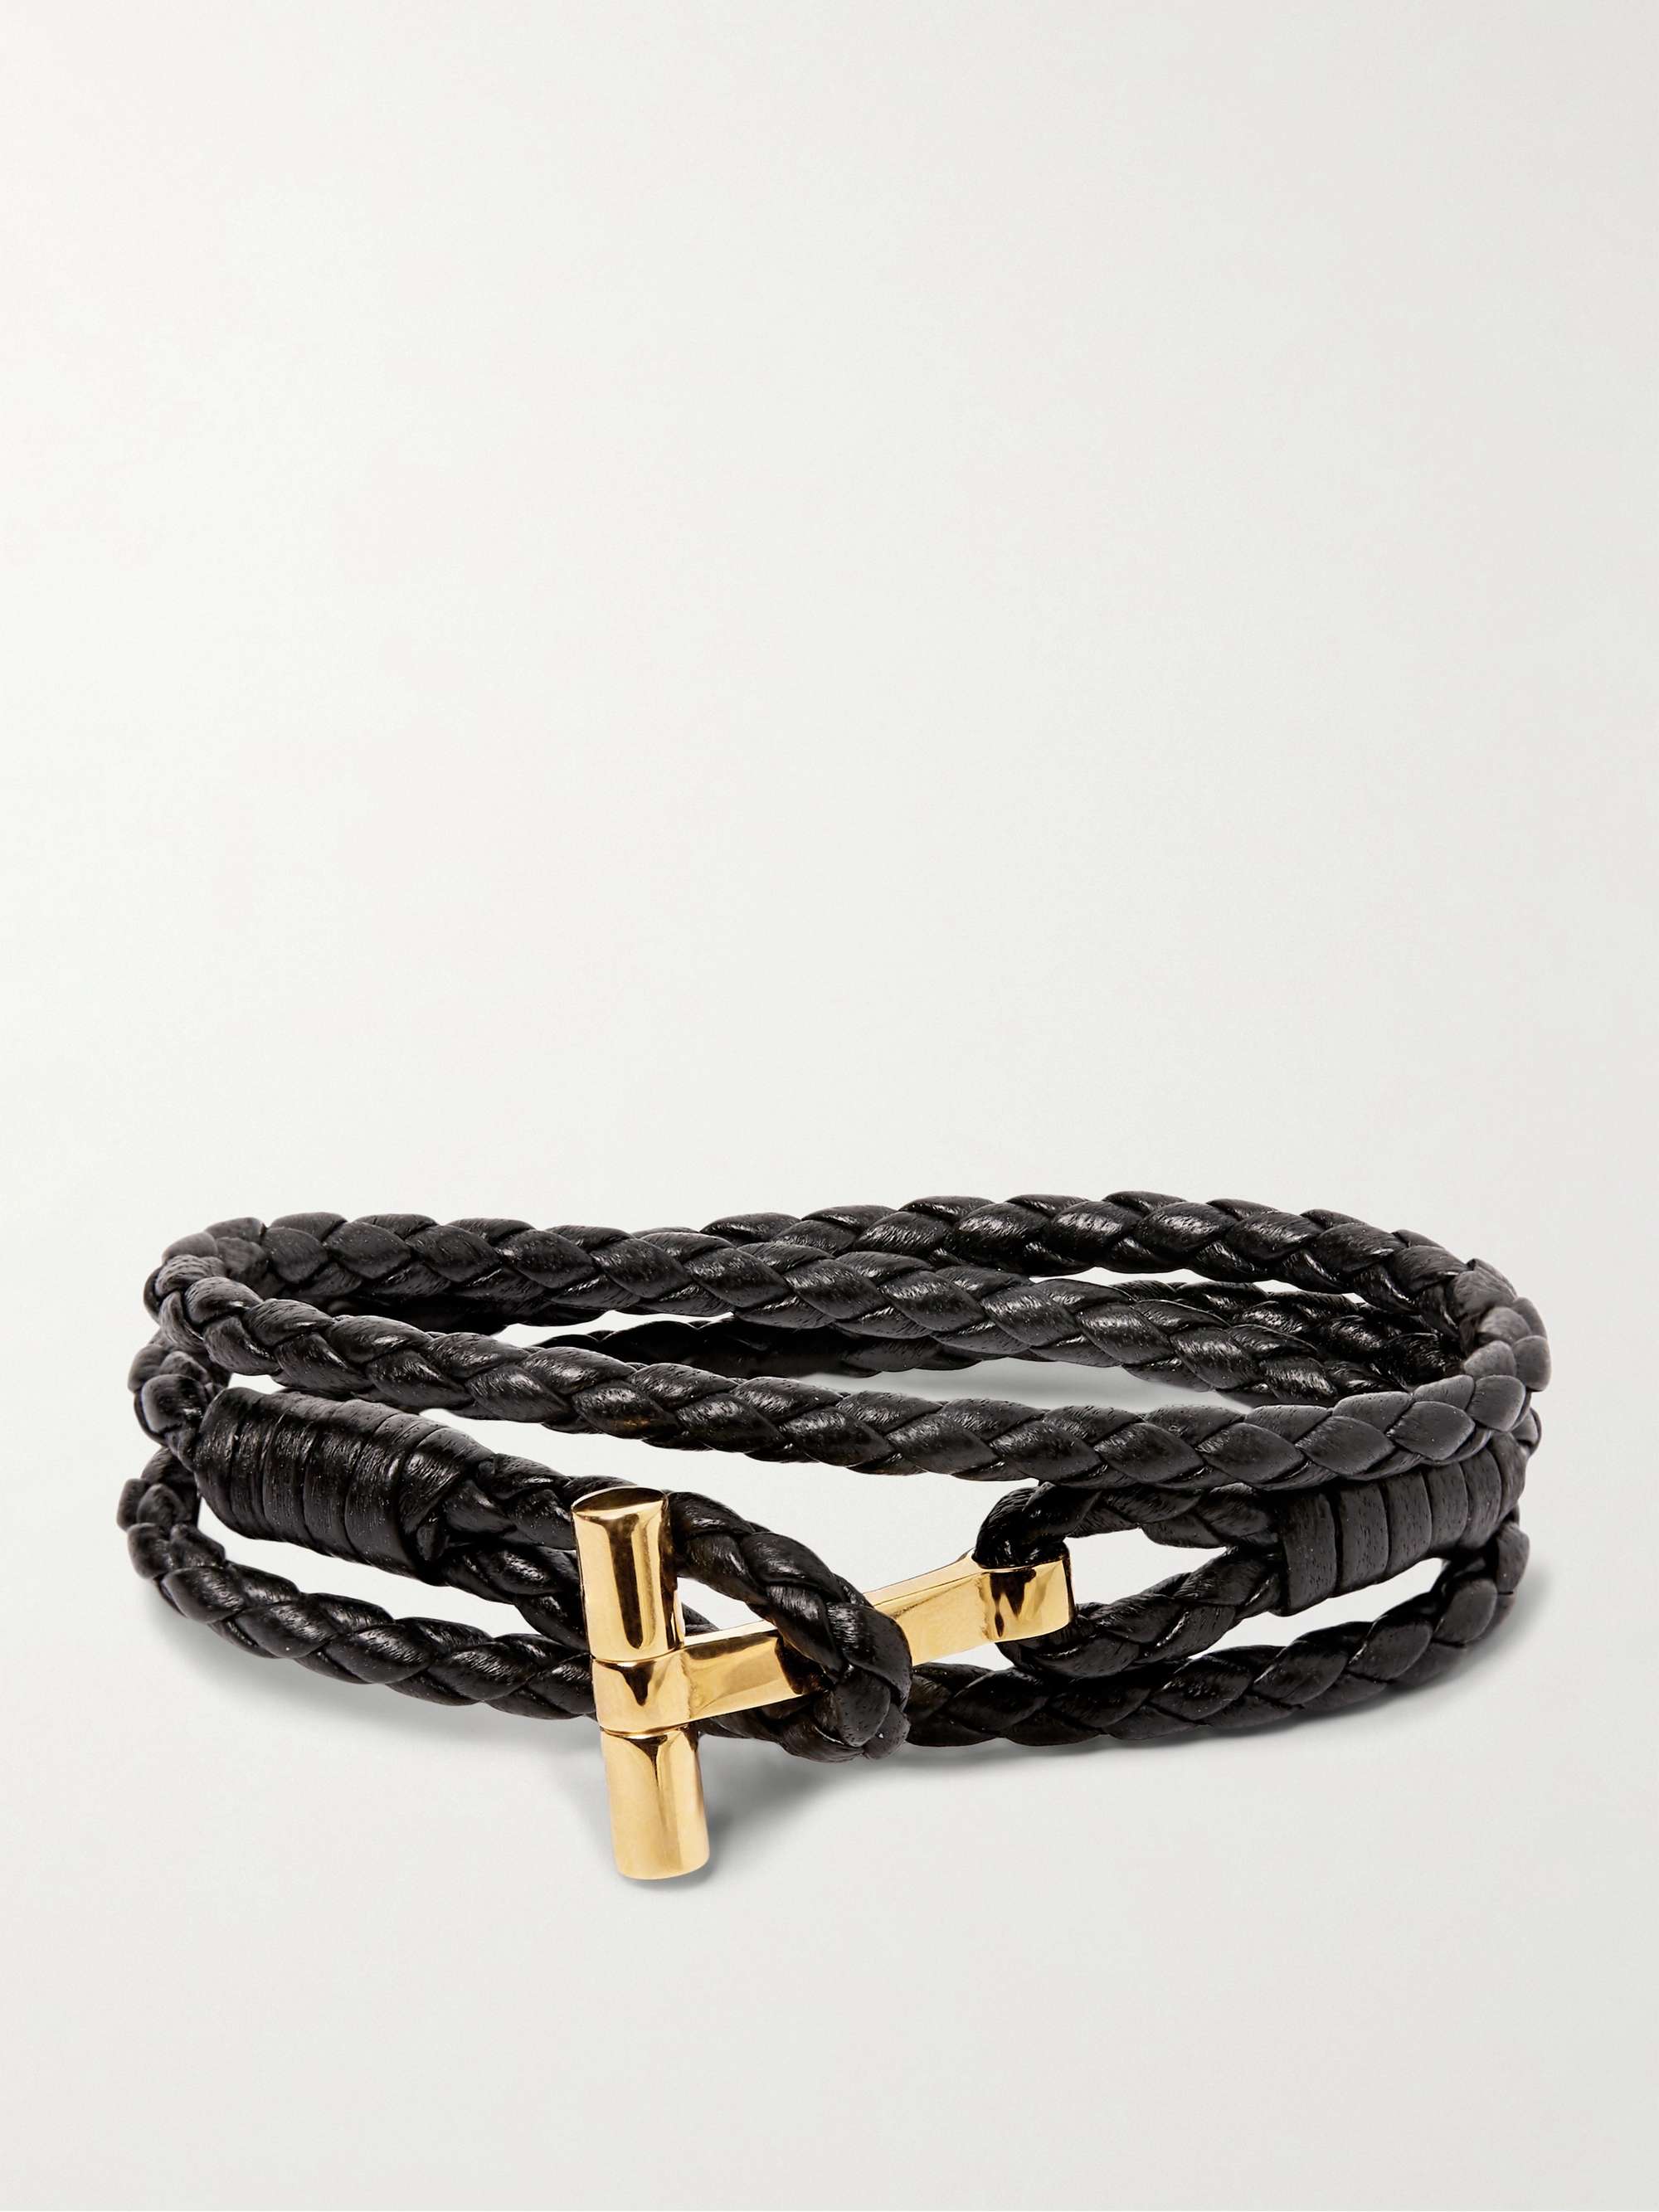 TOM FORD Woven Leather and Gold-Plated Wrap Bracelet